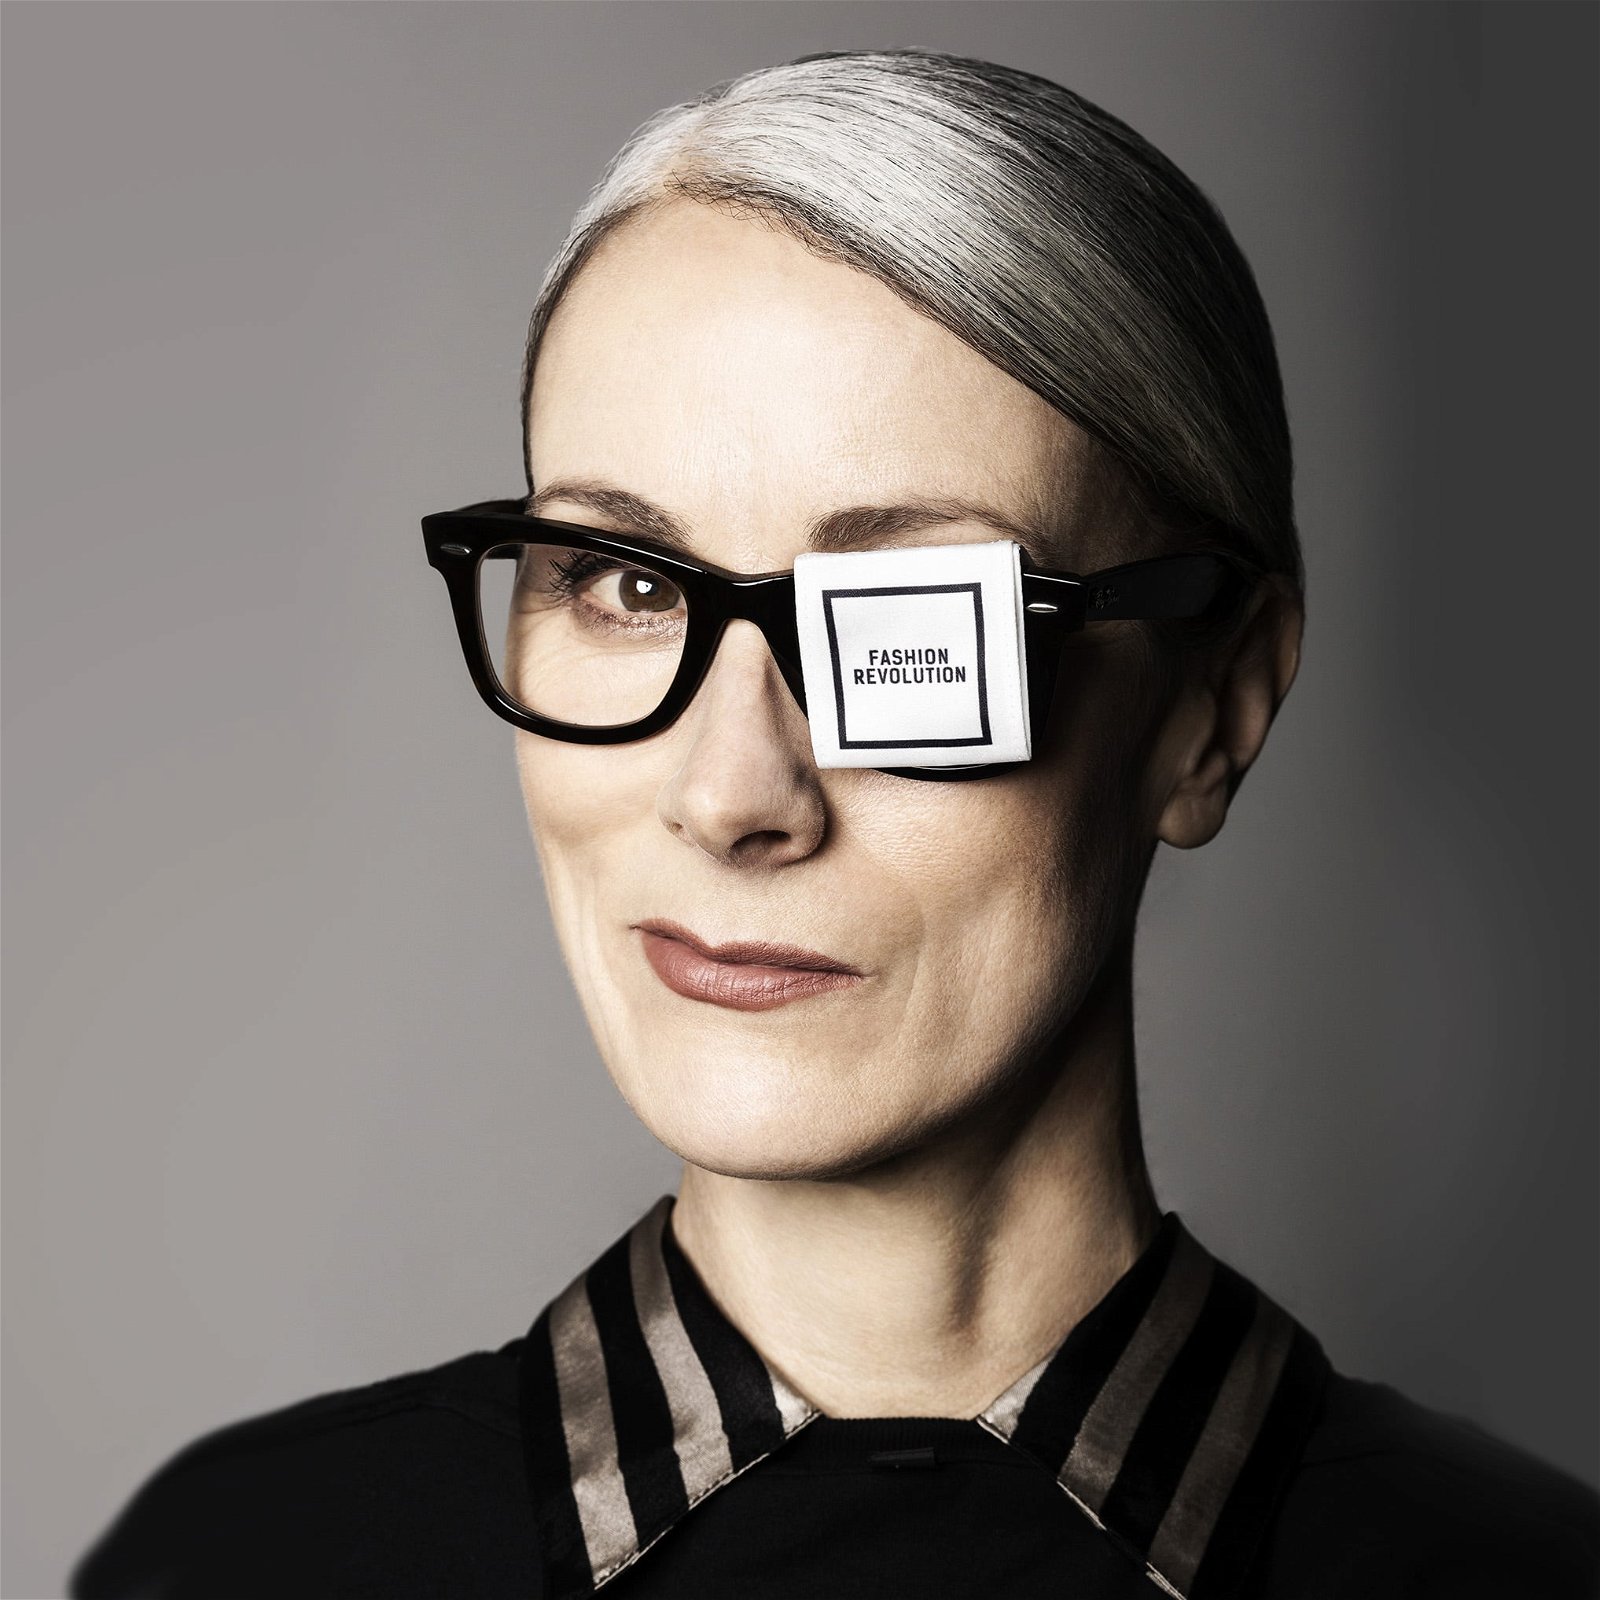 Caryn-Franklin-MBE-fashion-style-expert-speaker-at-Great-British-Speakers